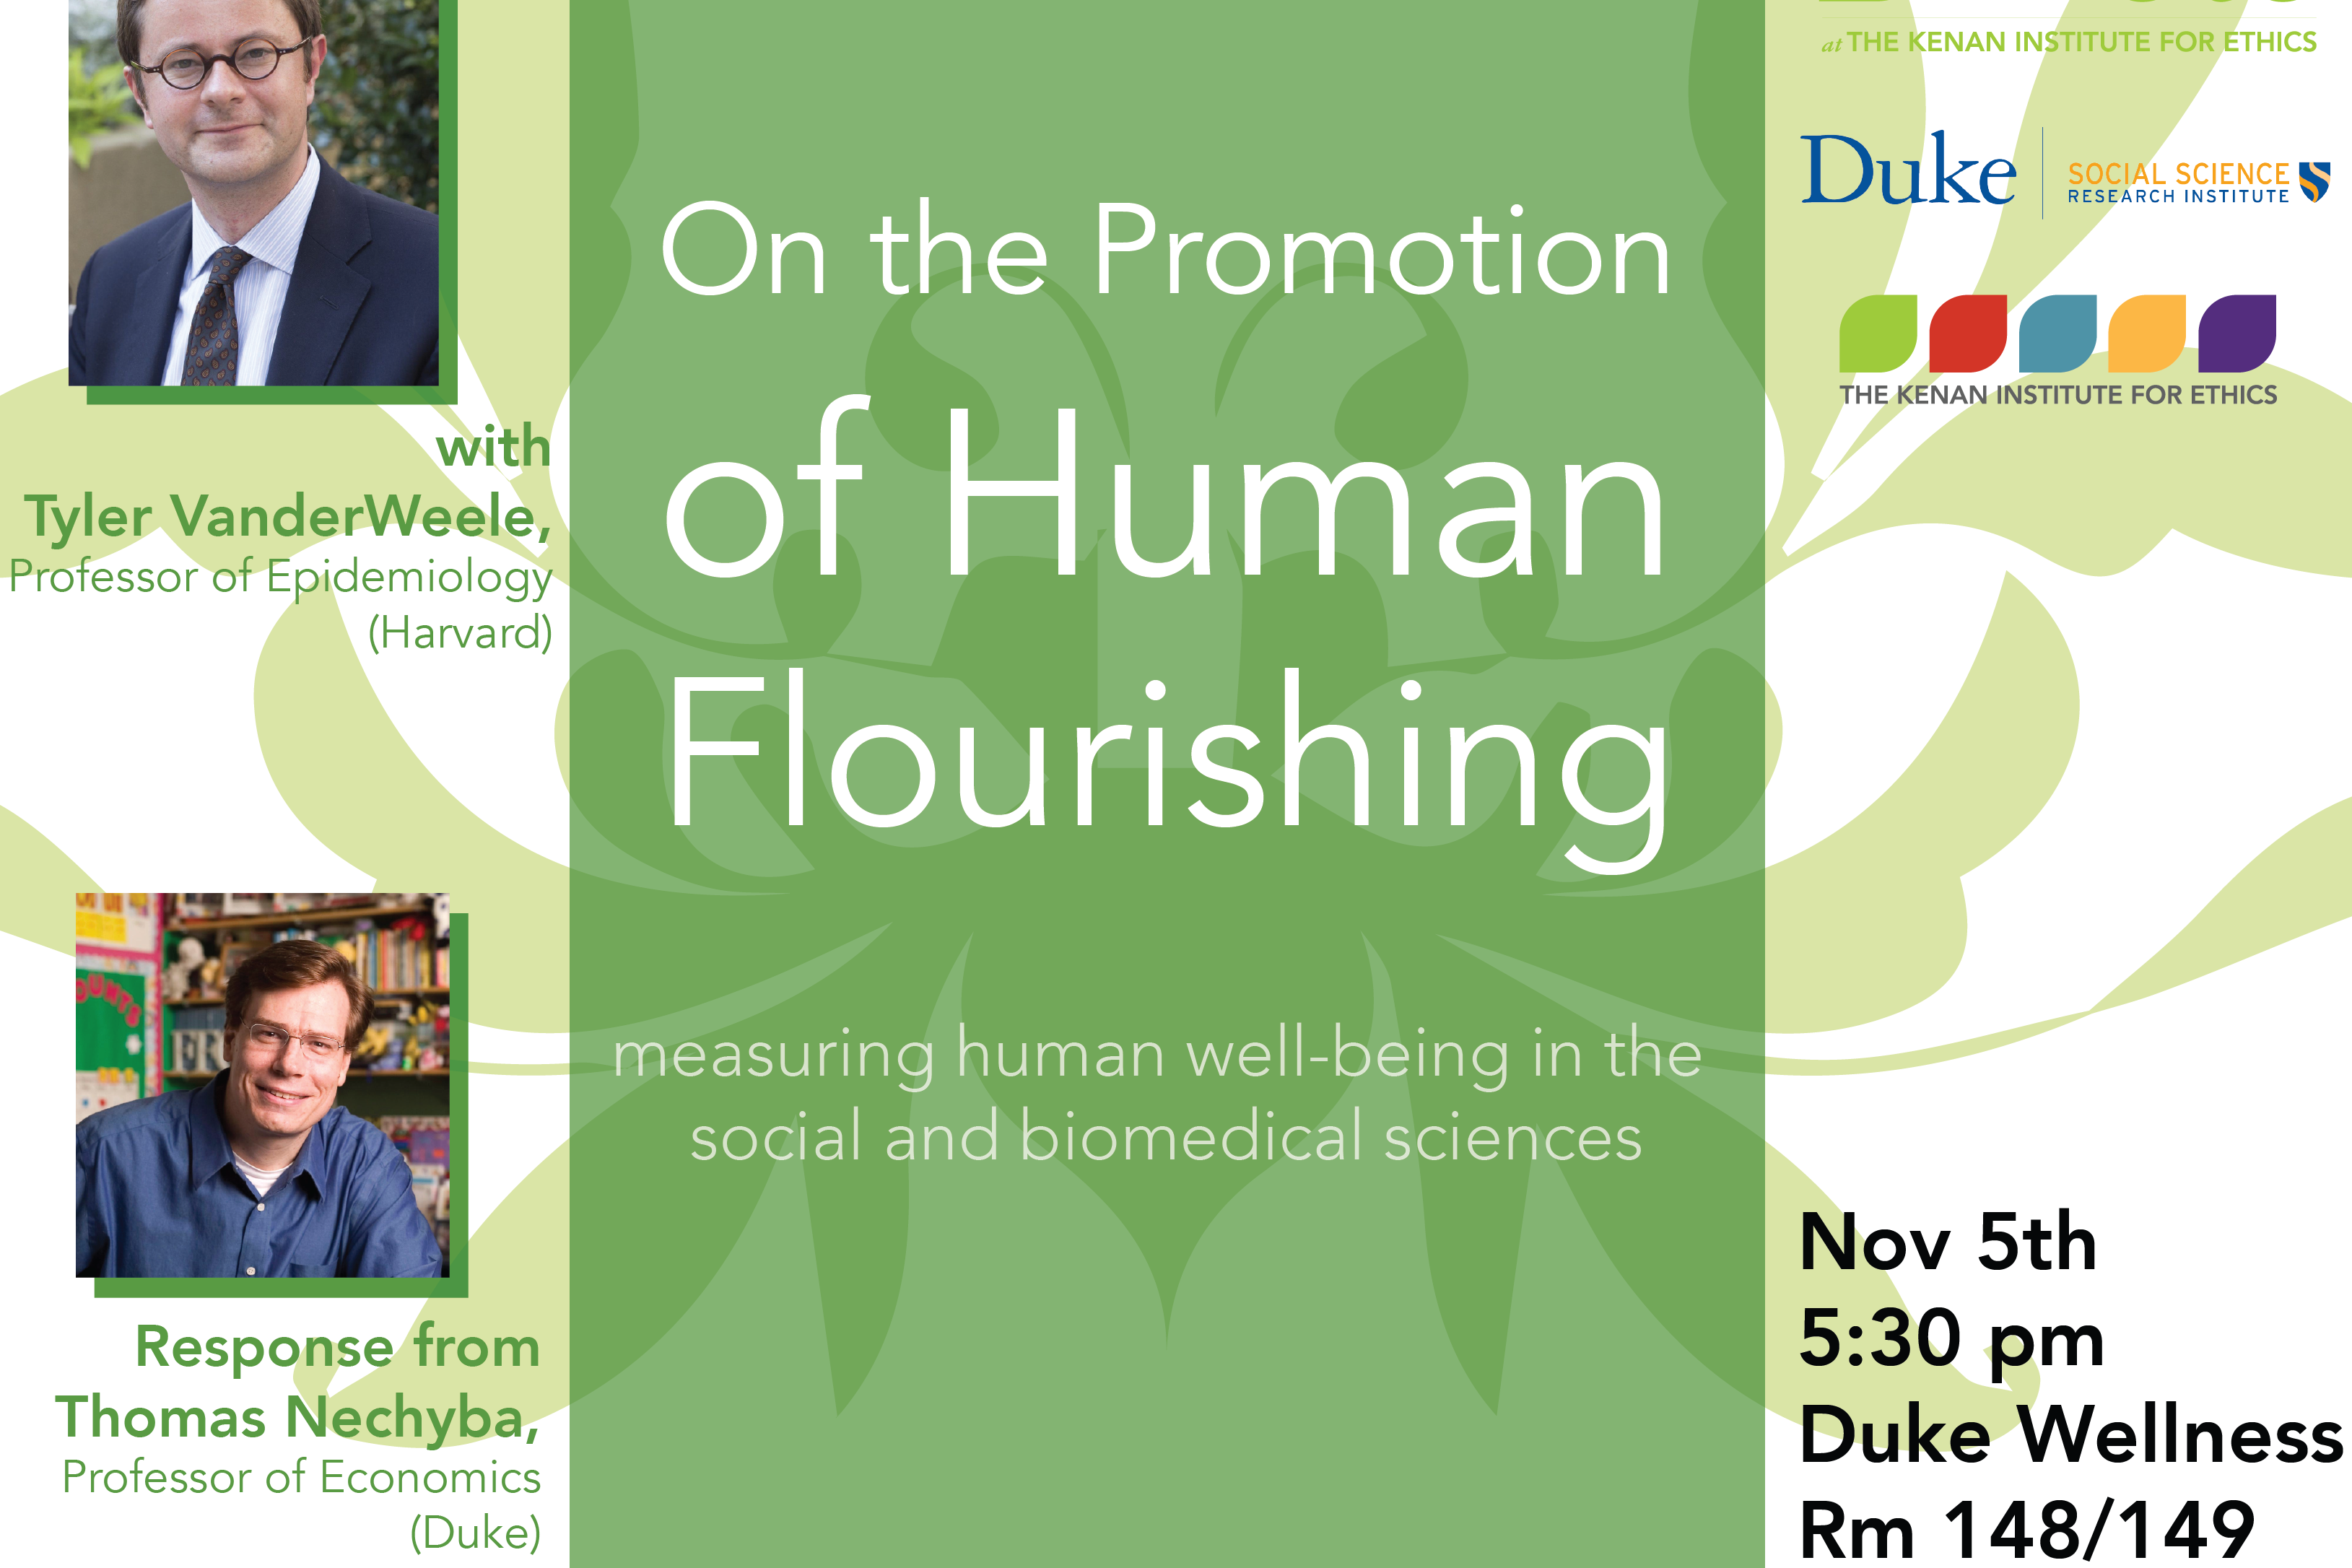 &quot;On the Promotion of Human Flourishing&quot; by Tyler VanderWeele